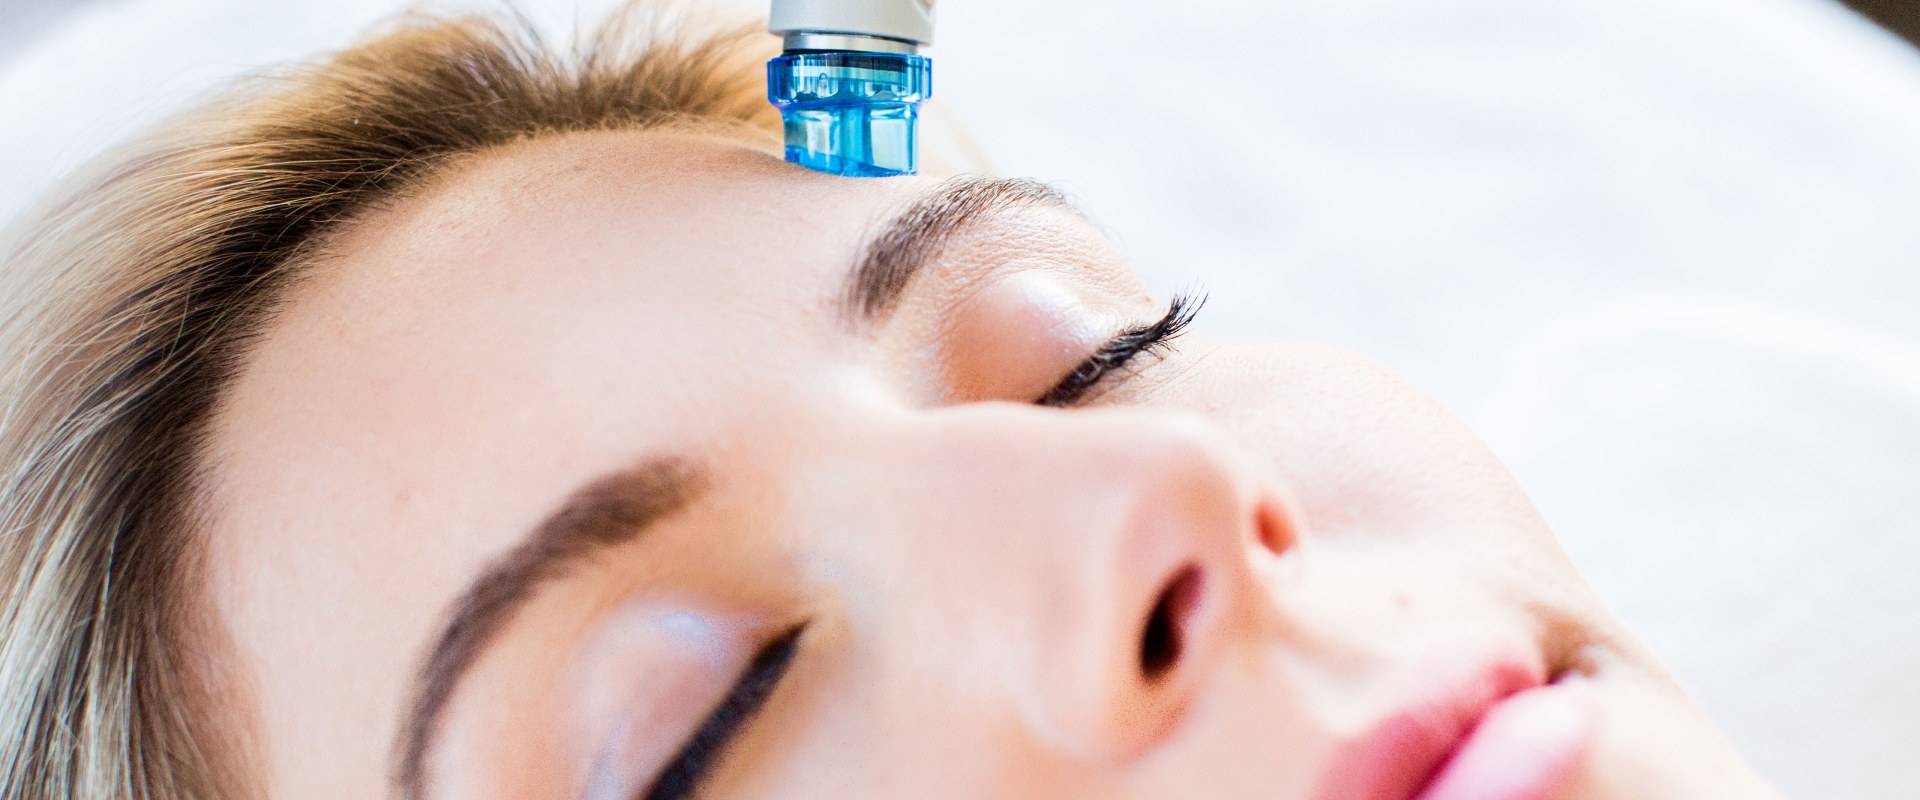 Everything You Need to Know About Hydrating Facial Treatments